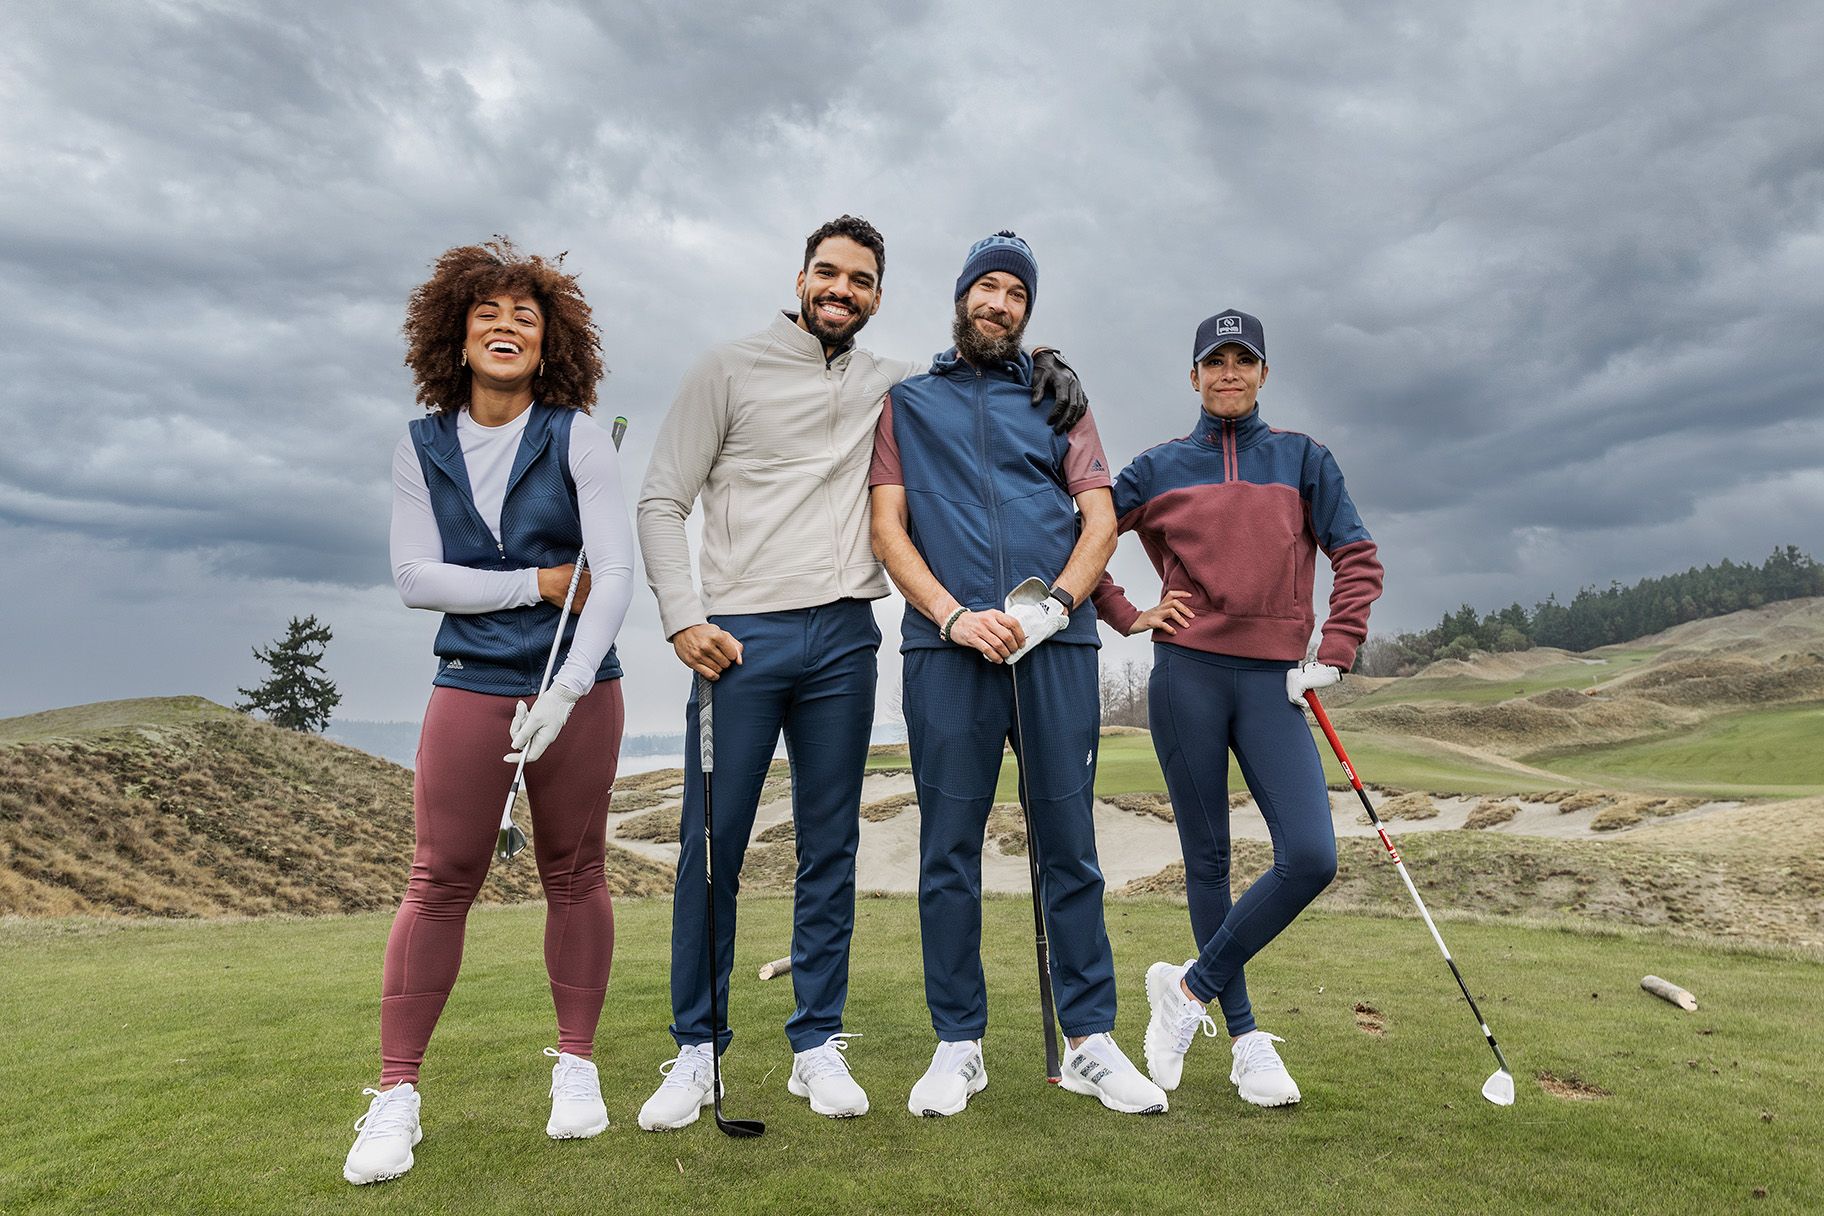 The Best Golf Clothing Brands (That Are Actually Stylish) - oggsync.com